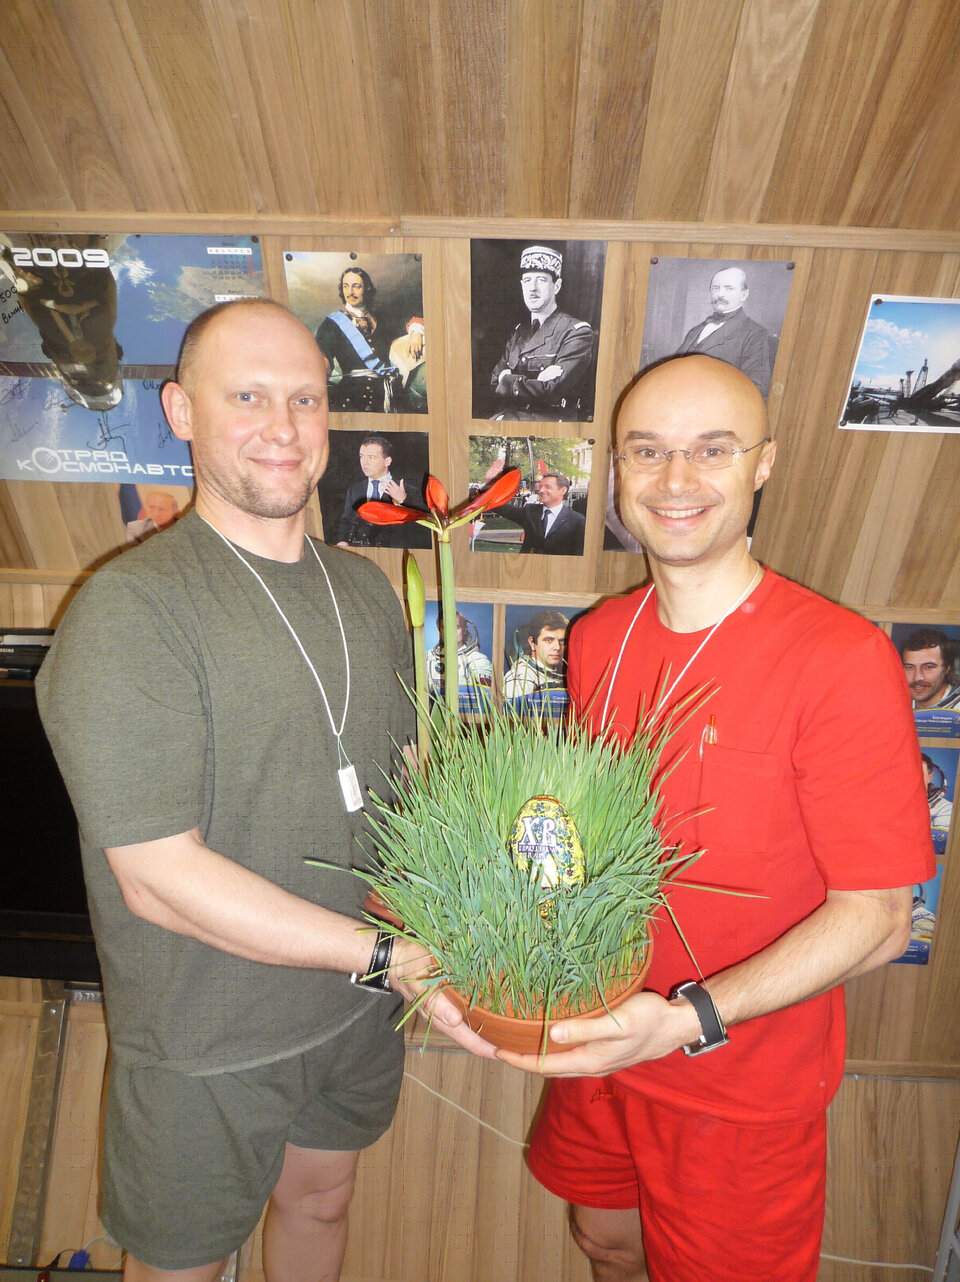 Egg hunting: Cyrille and Oleg find a 'space egg' on orthodox Easter